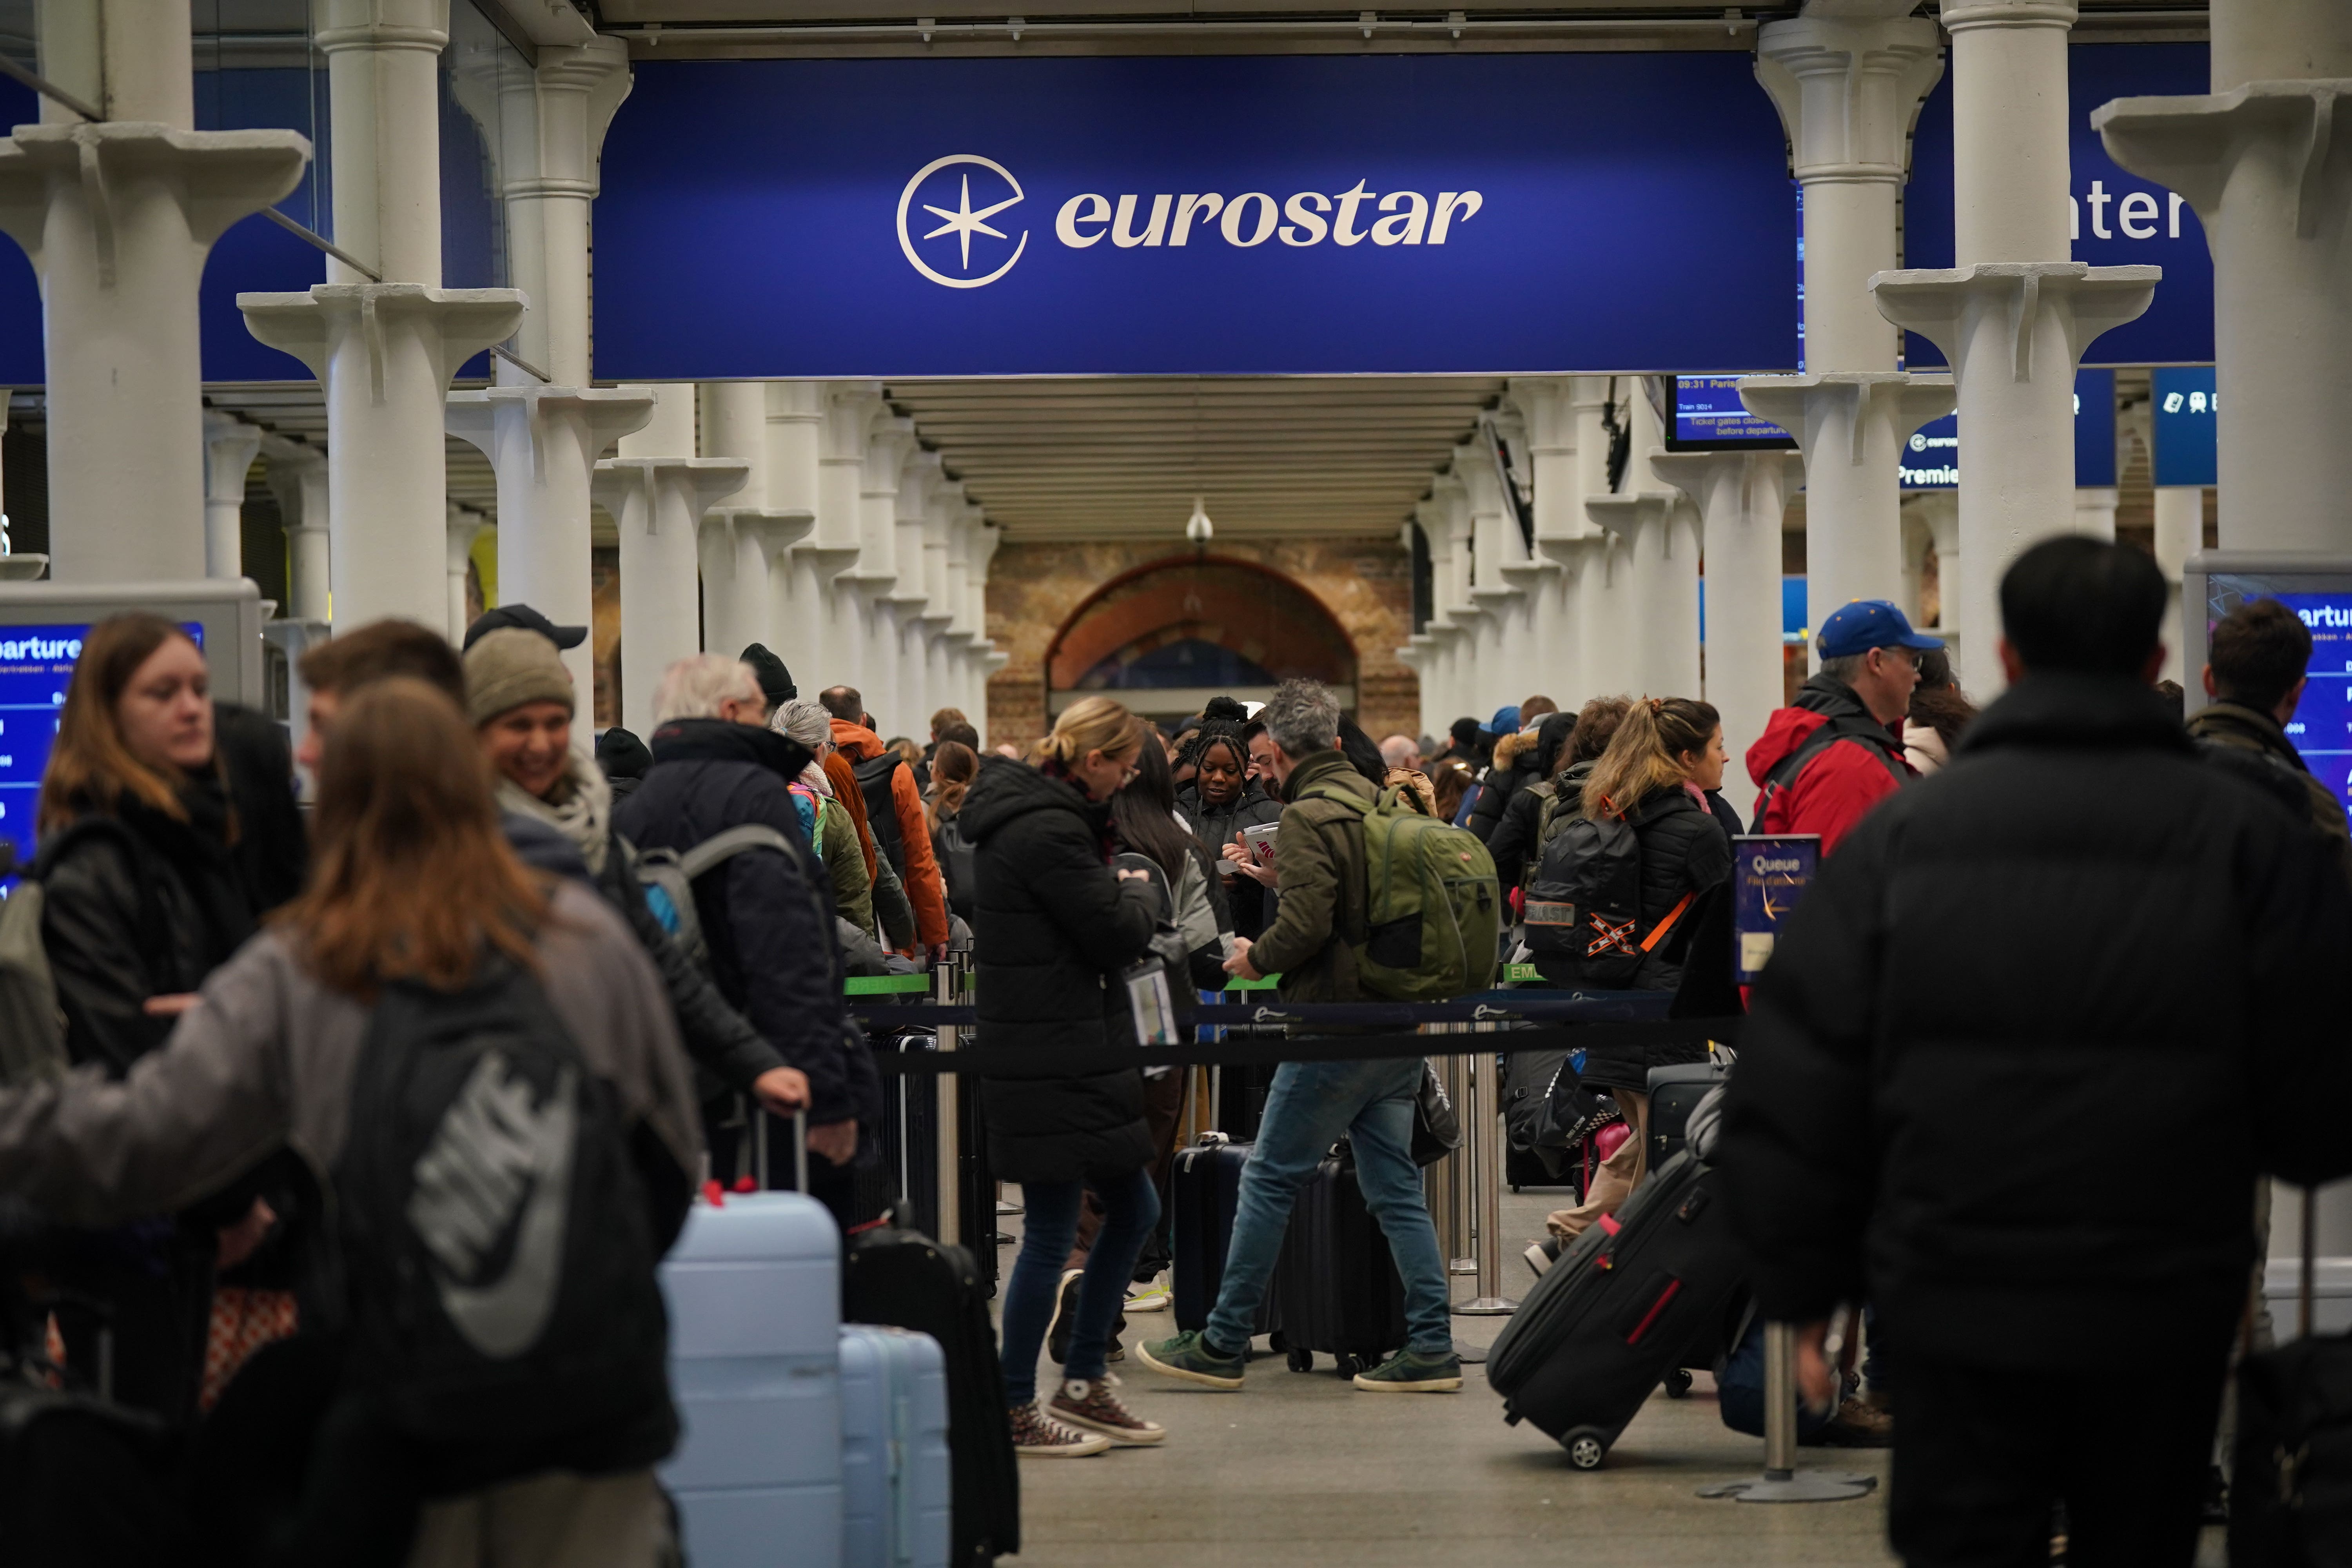 Eurostar passengers have been left disappointed after flooding caused cancellations (Yui Mok/PA)